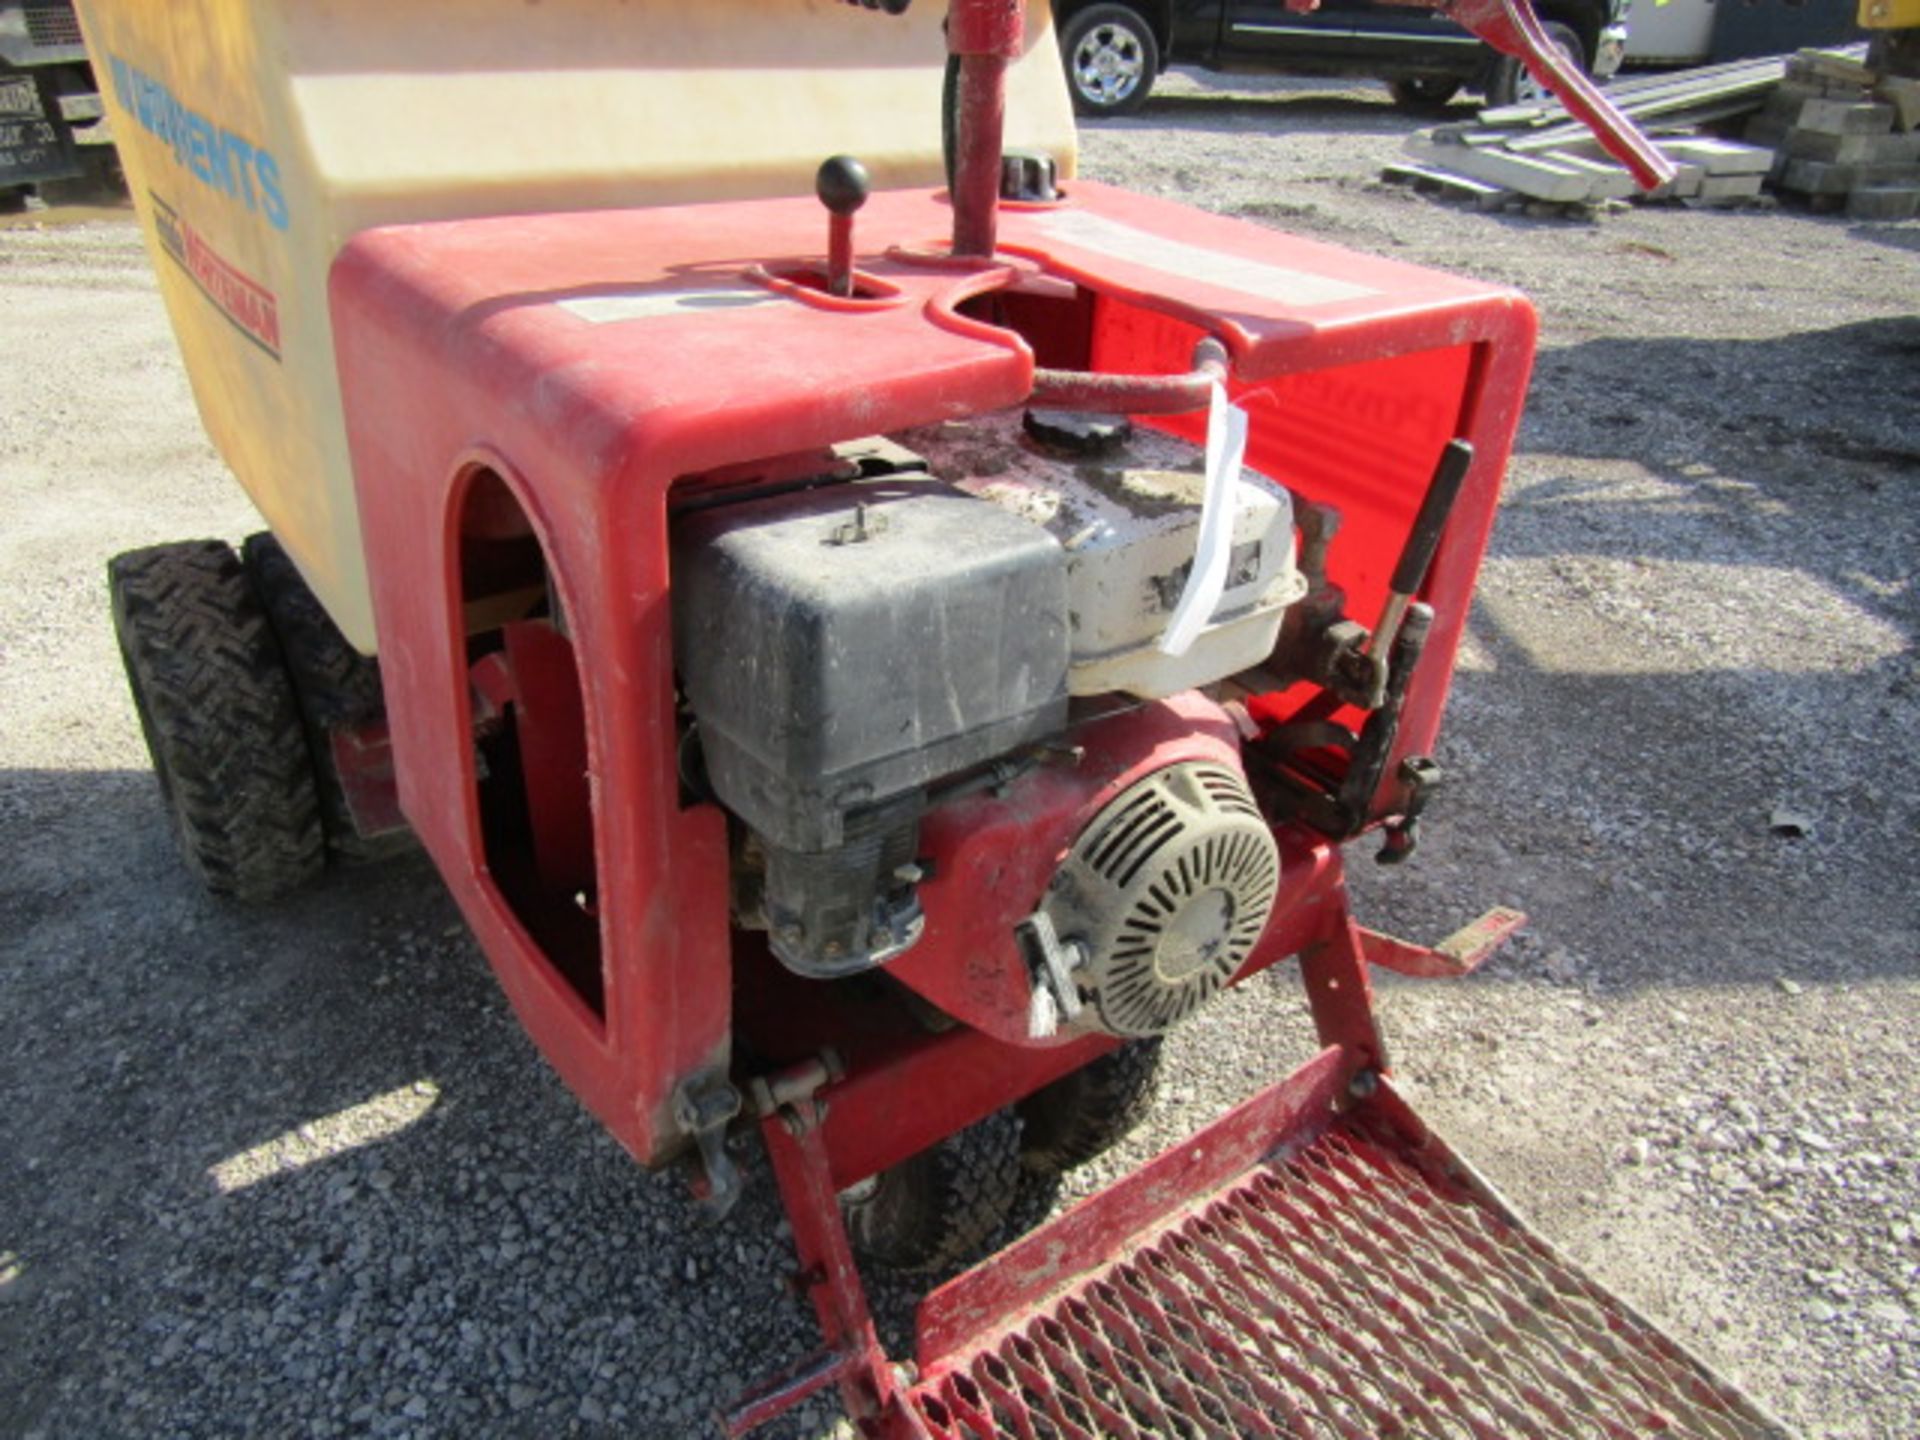 Whiteman Power Concrete Buggy, Model # OWAPB16R, Serial # 9606-36070, Located in Wildwood, MO - Image 3 of 6